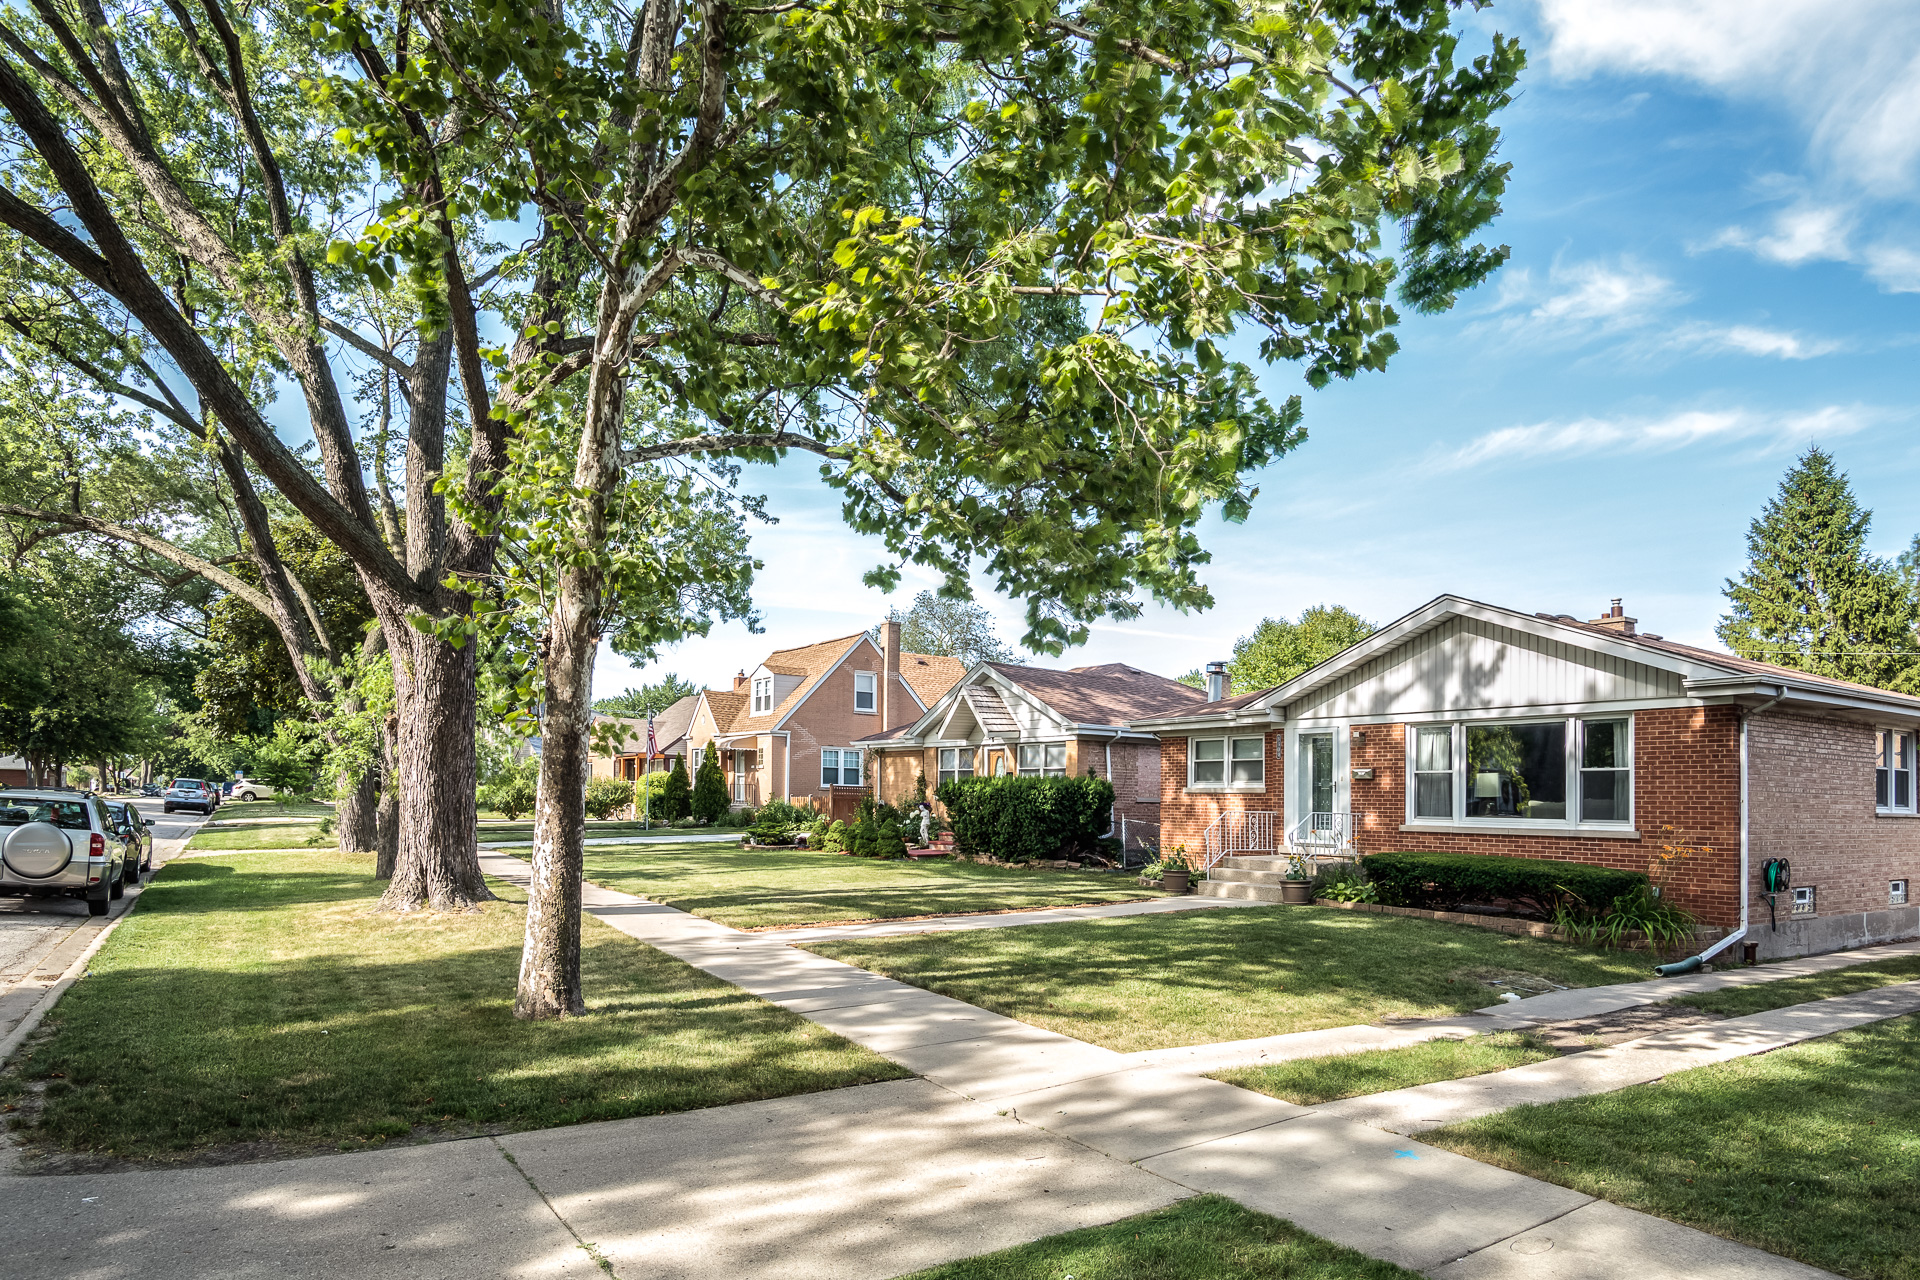 8309 N. Oriole Ave. Niles, IL